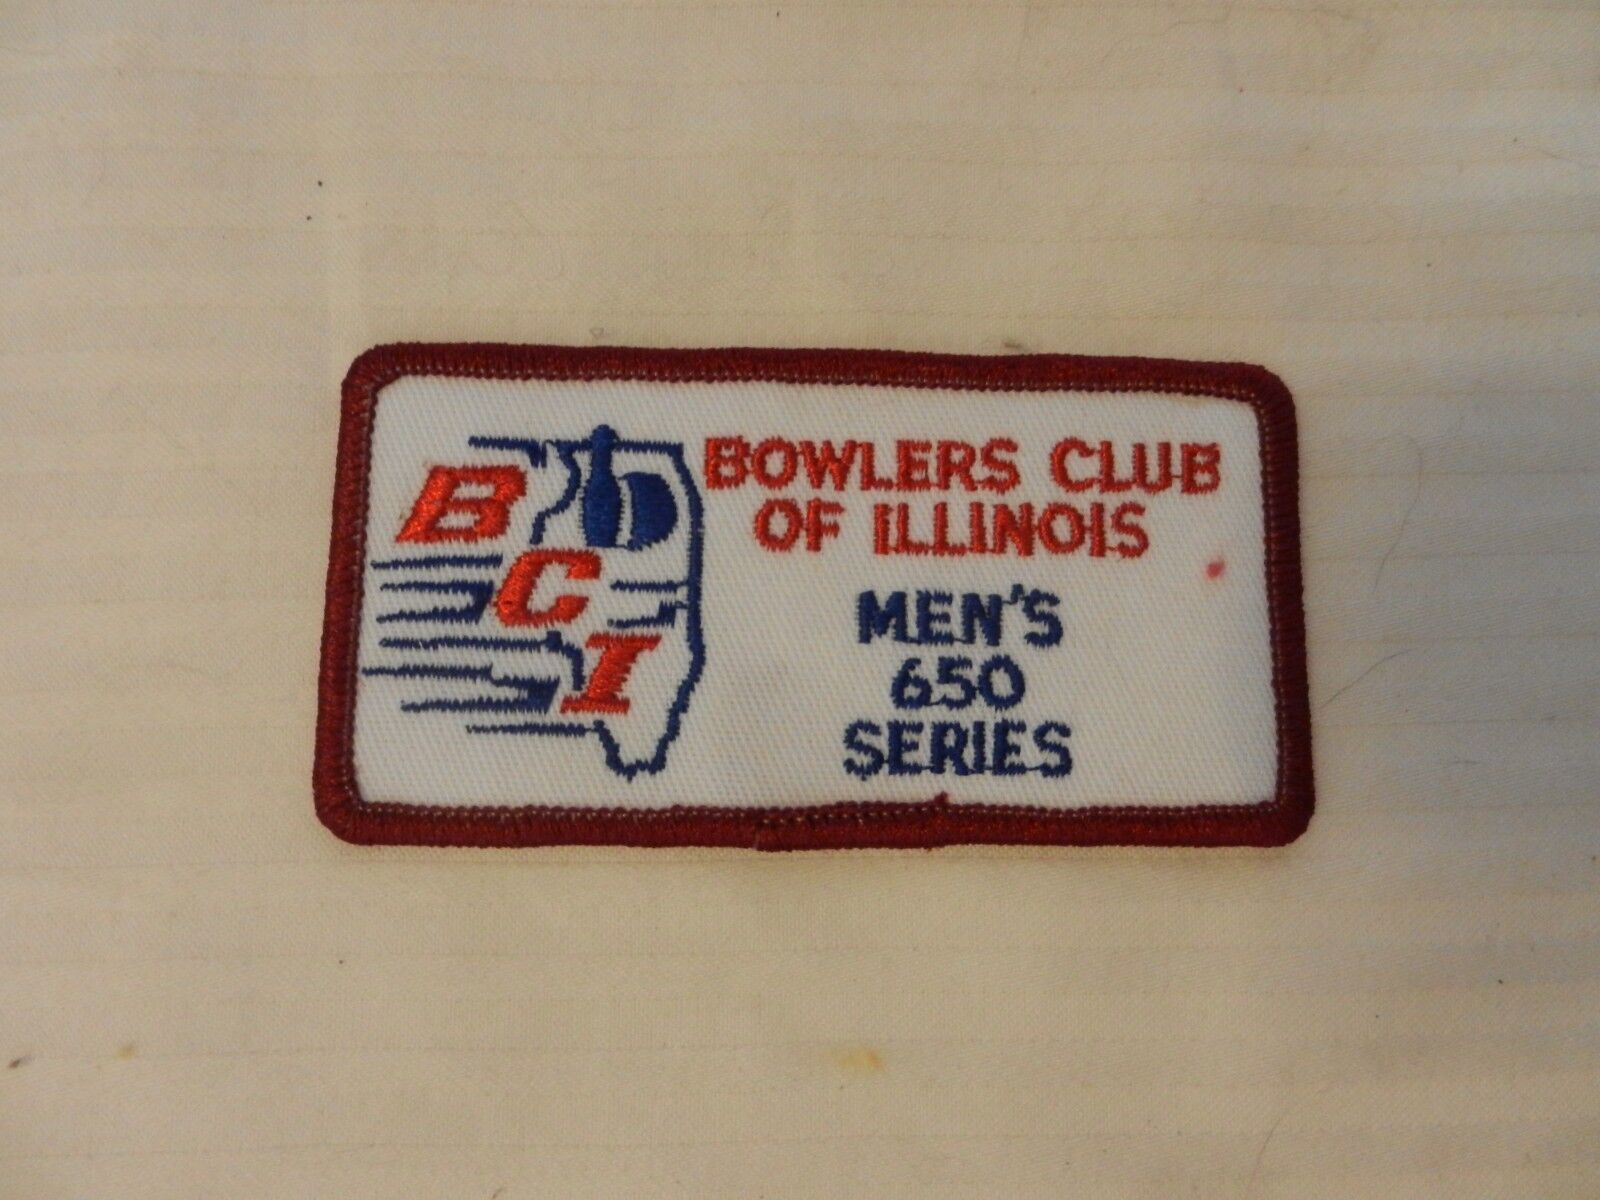 Primary image for Bowlers Club of Illinois Men's 650 Series Patch from the 90s Maroon Border